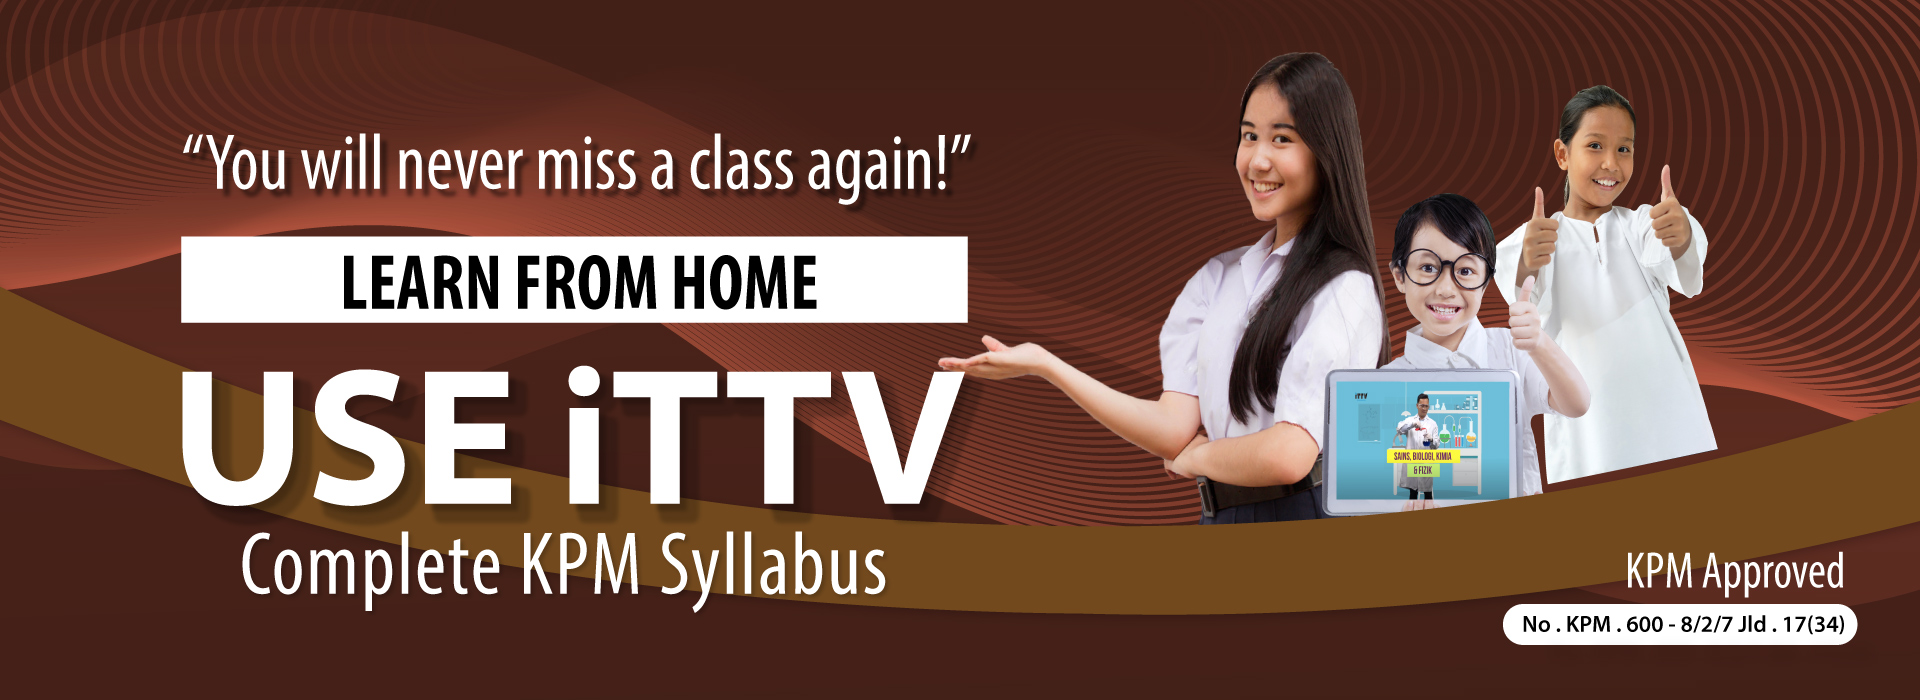 iTTV - Learn From Home